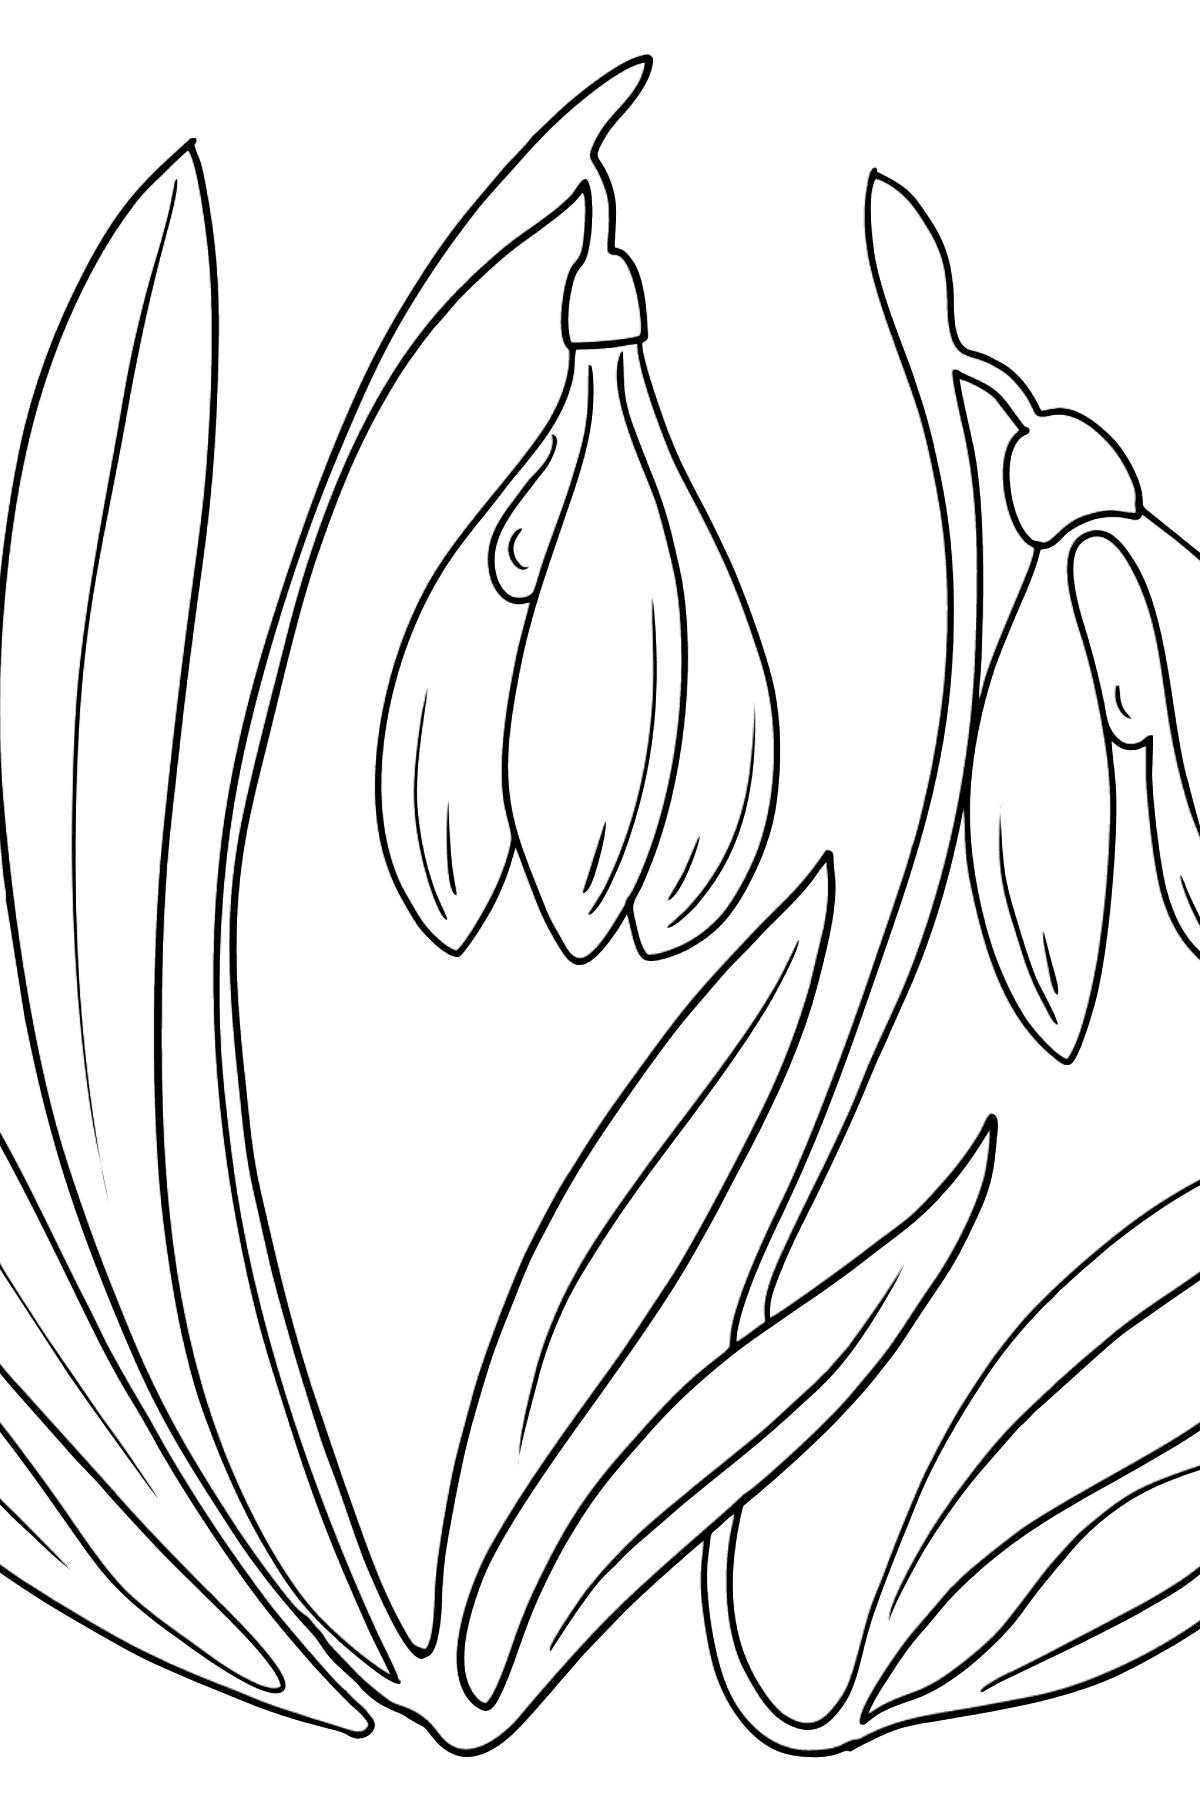 Coloring Page - spring flowers - Coloring Pages for Kids